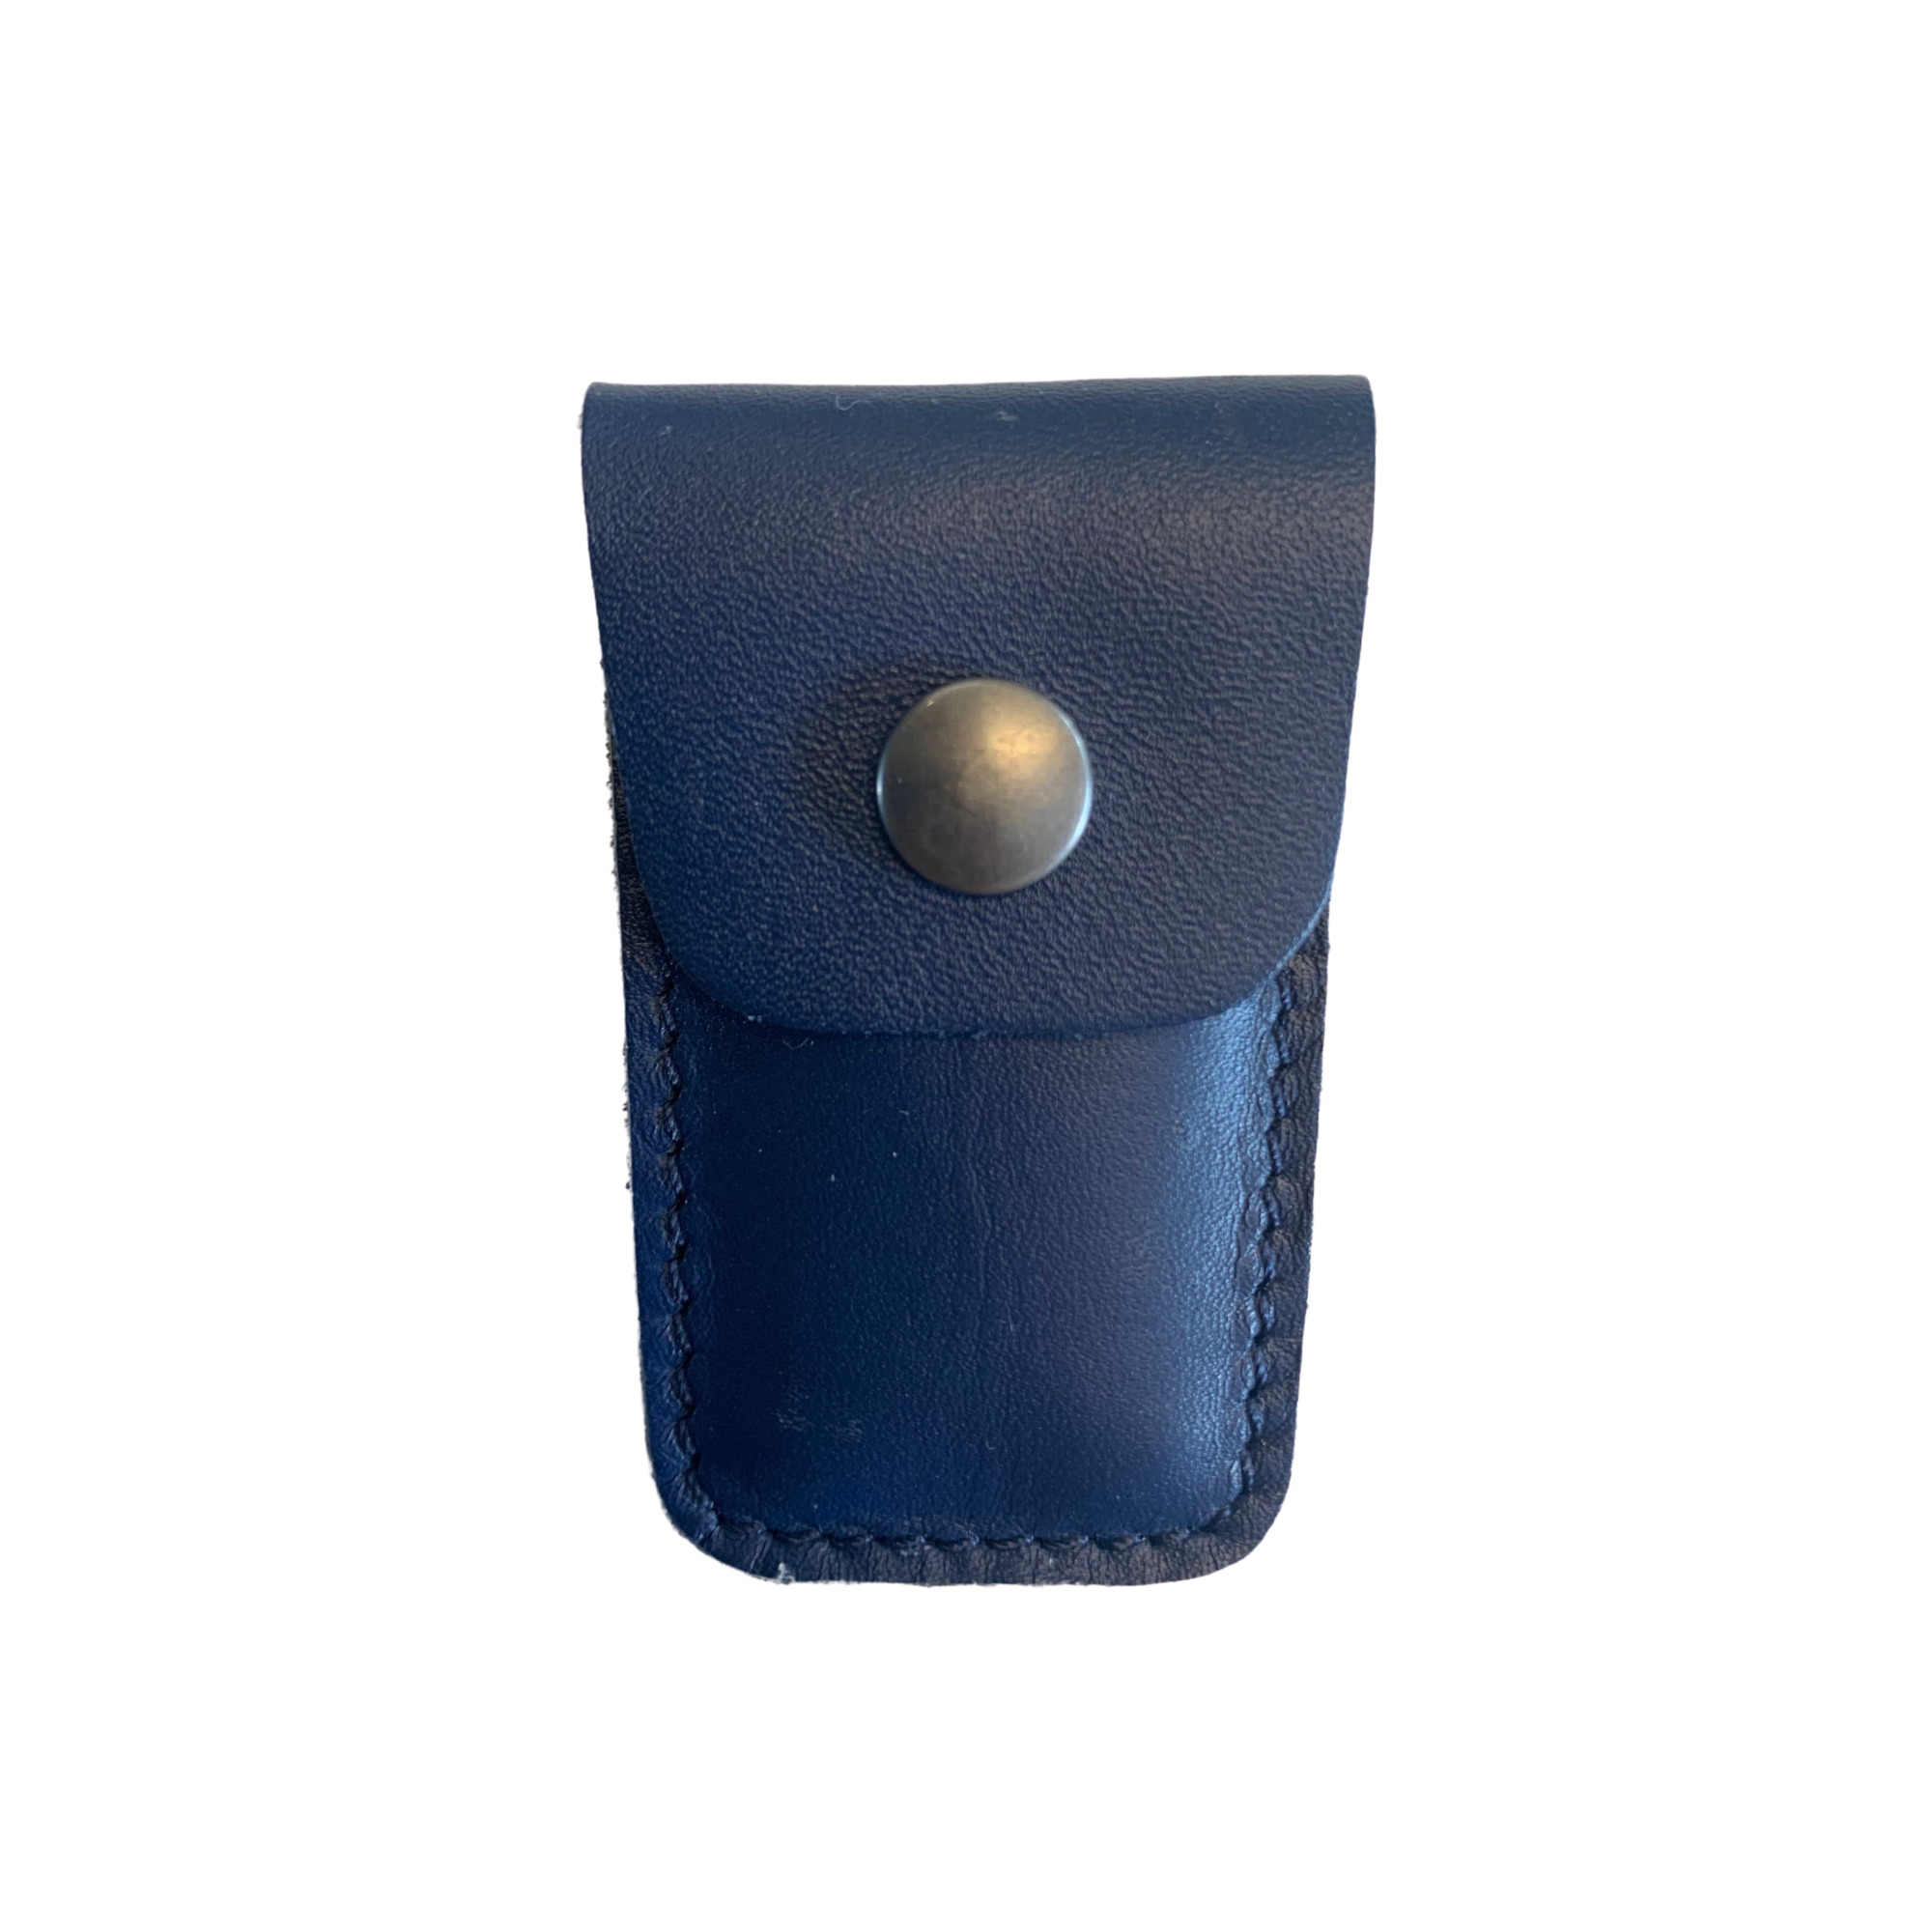 Nogent Folding scissors Blue leather case Made in France Clementine Boutique Canada